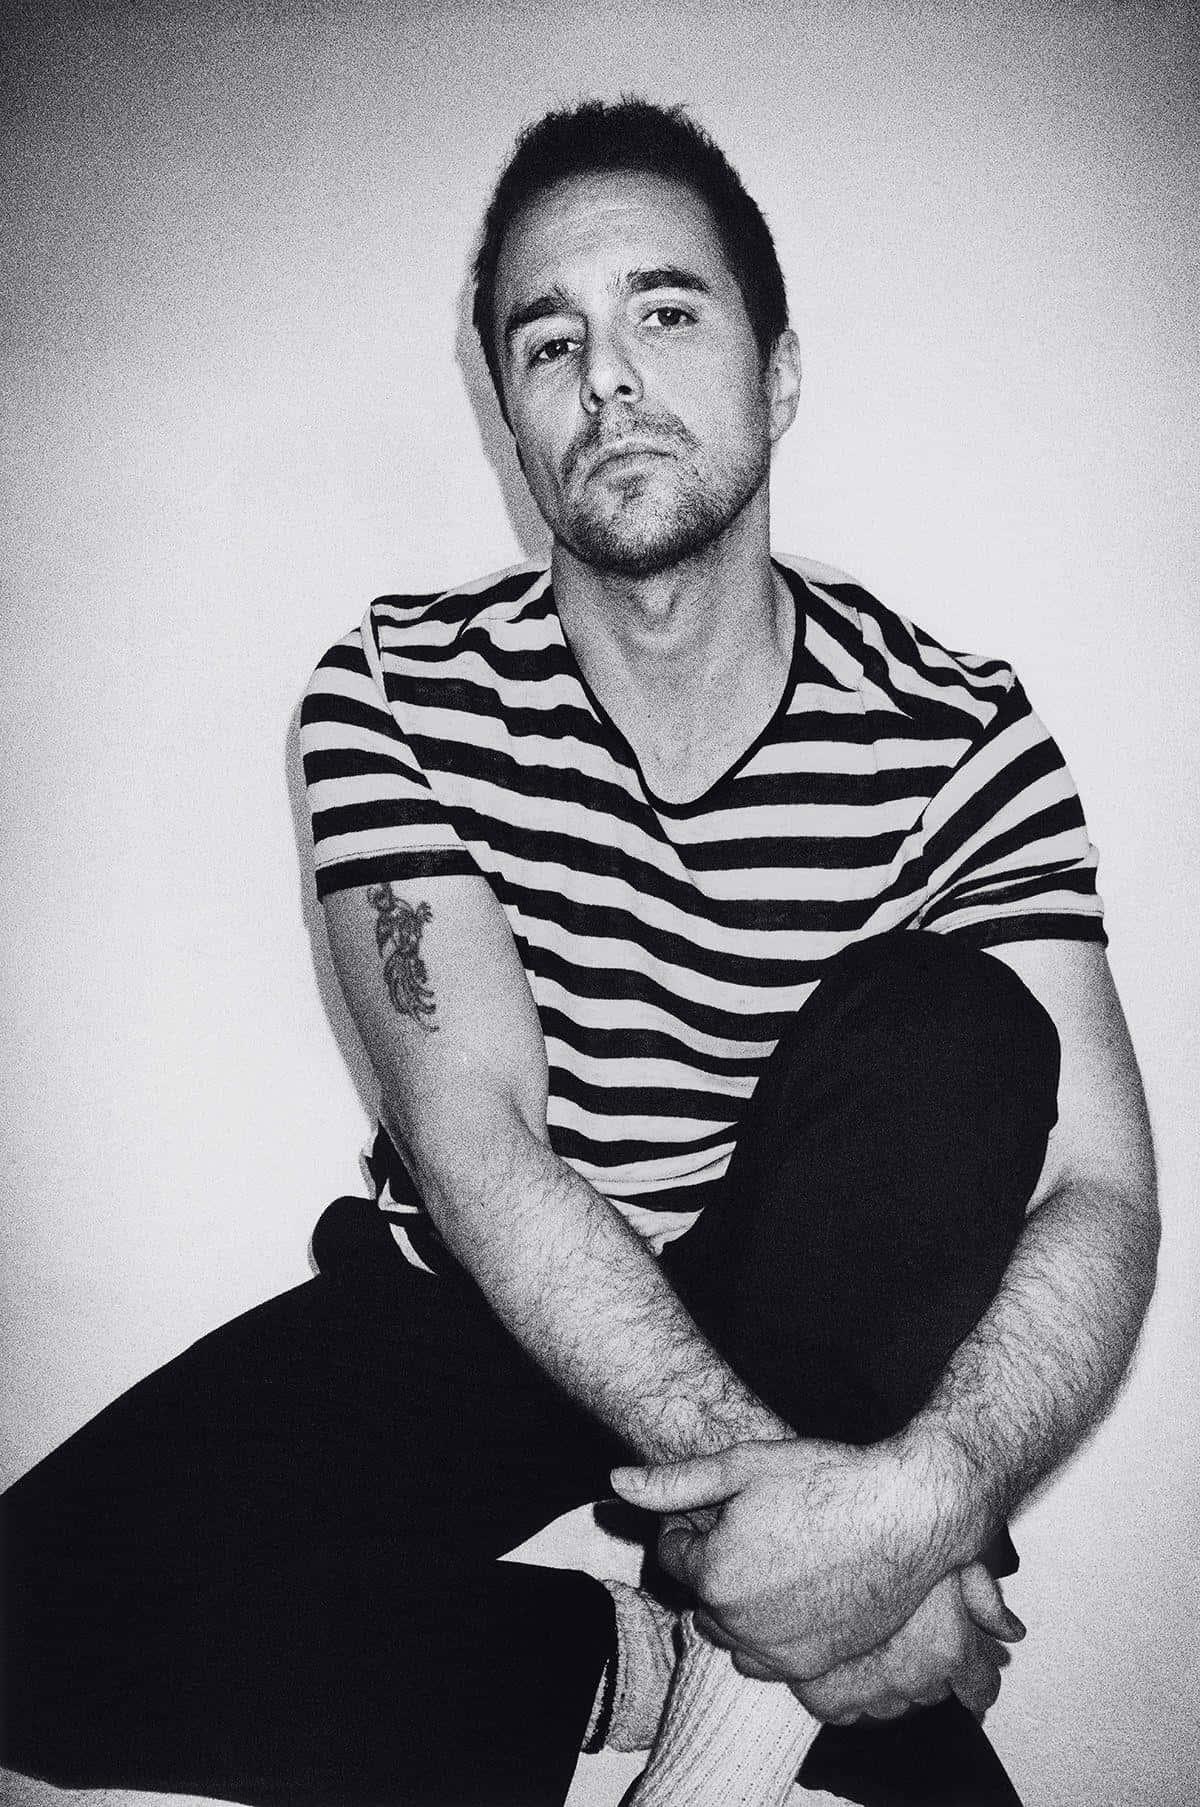 Caption: The Enigmatic Sam Rockwell in Black and White Wallpaper